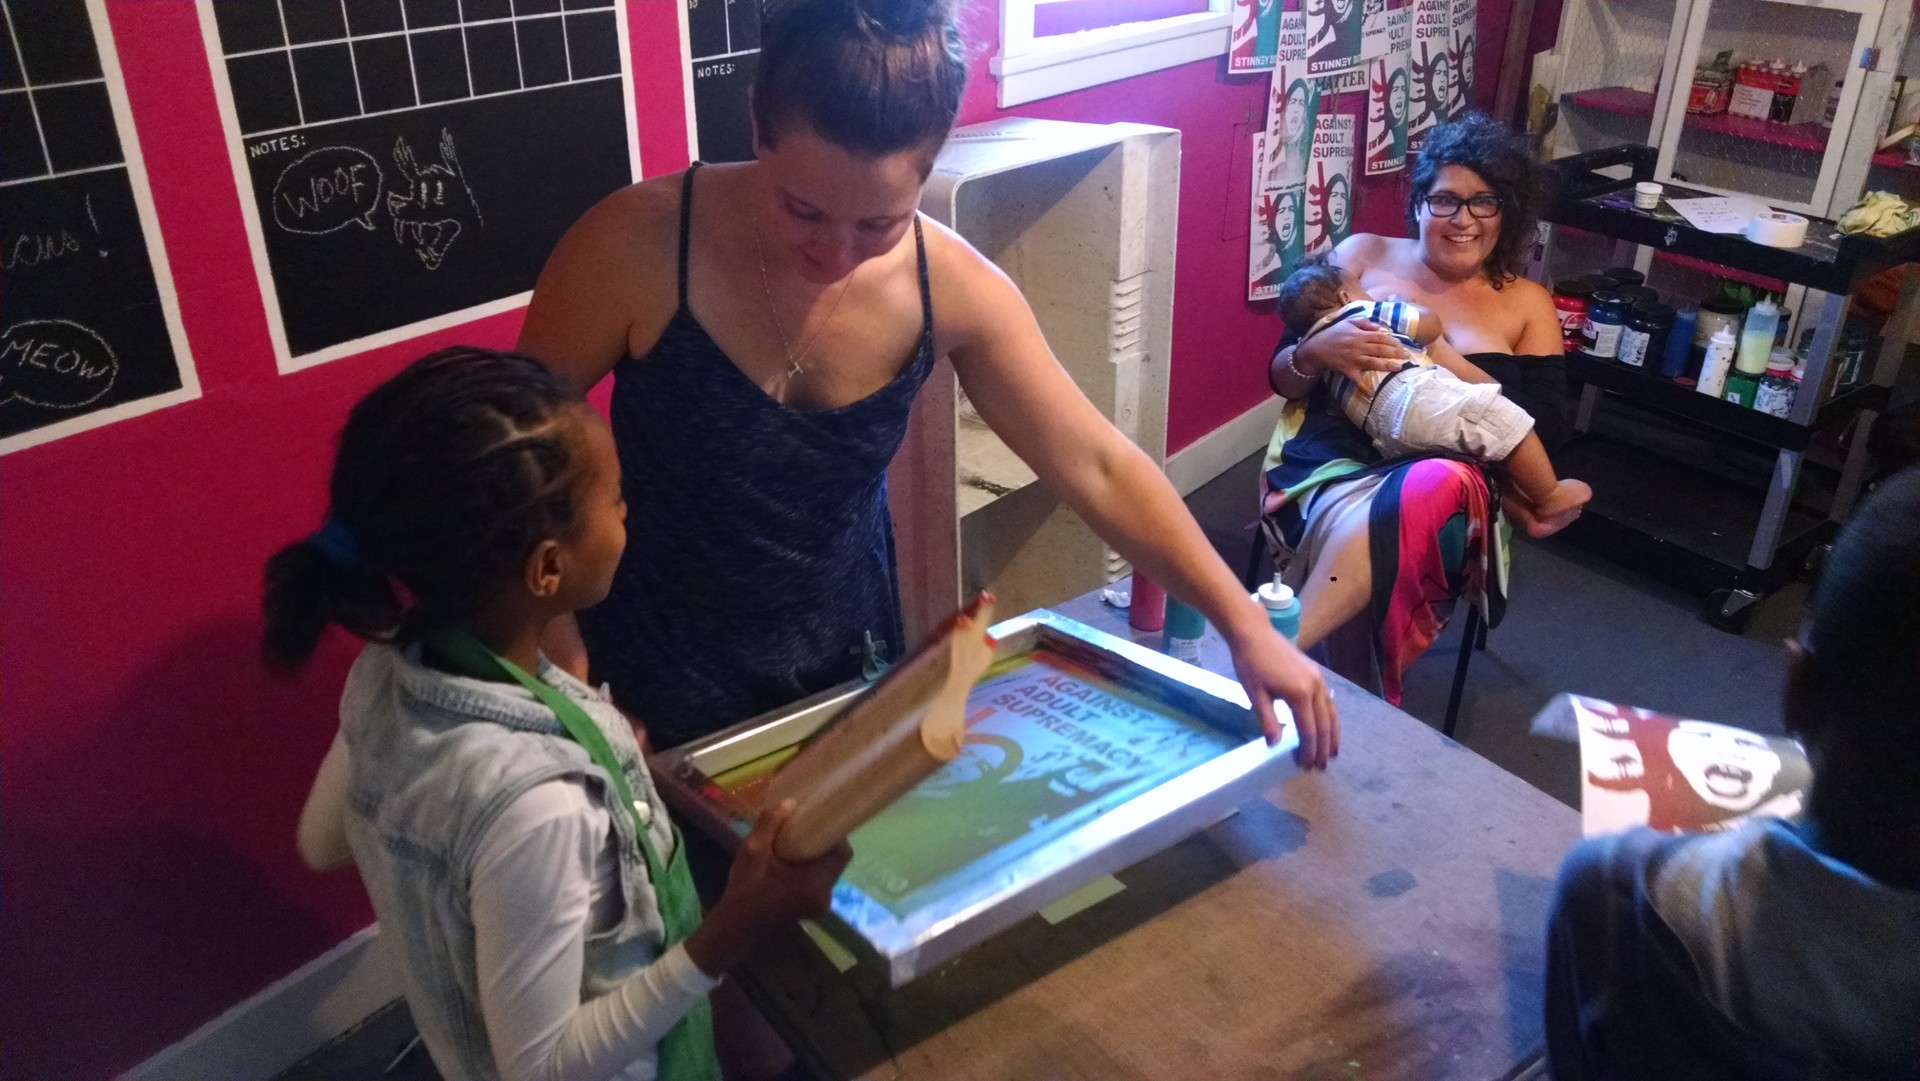 Franki Velez (with baby) helps teach screenprinting at the Omni Commons.